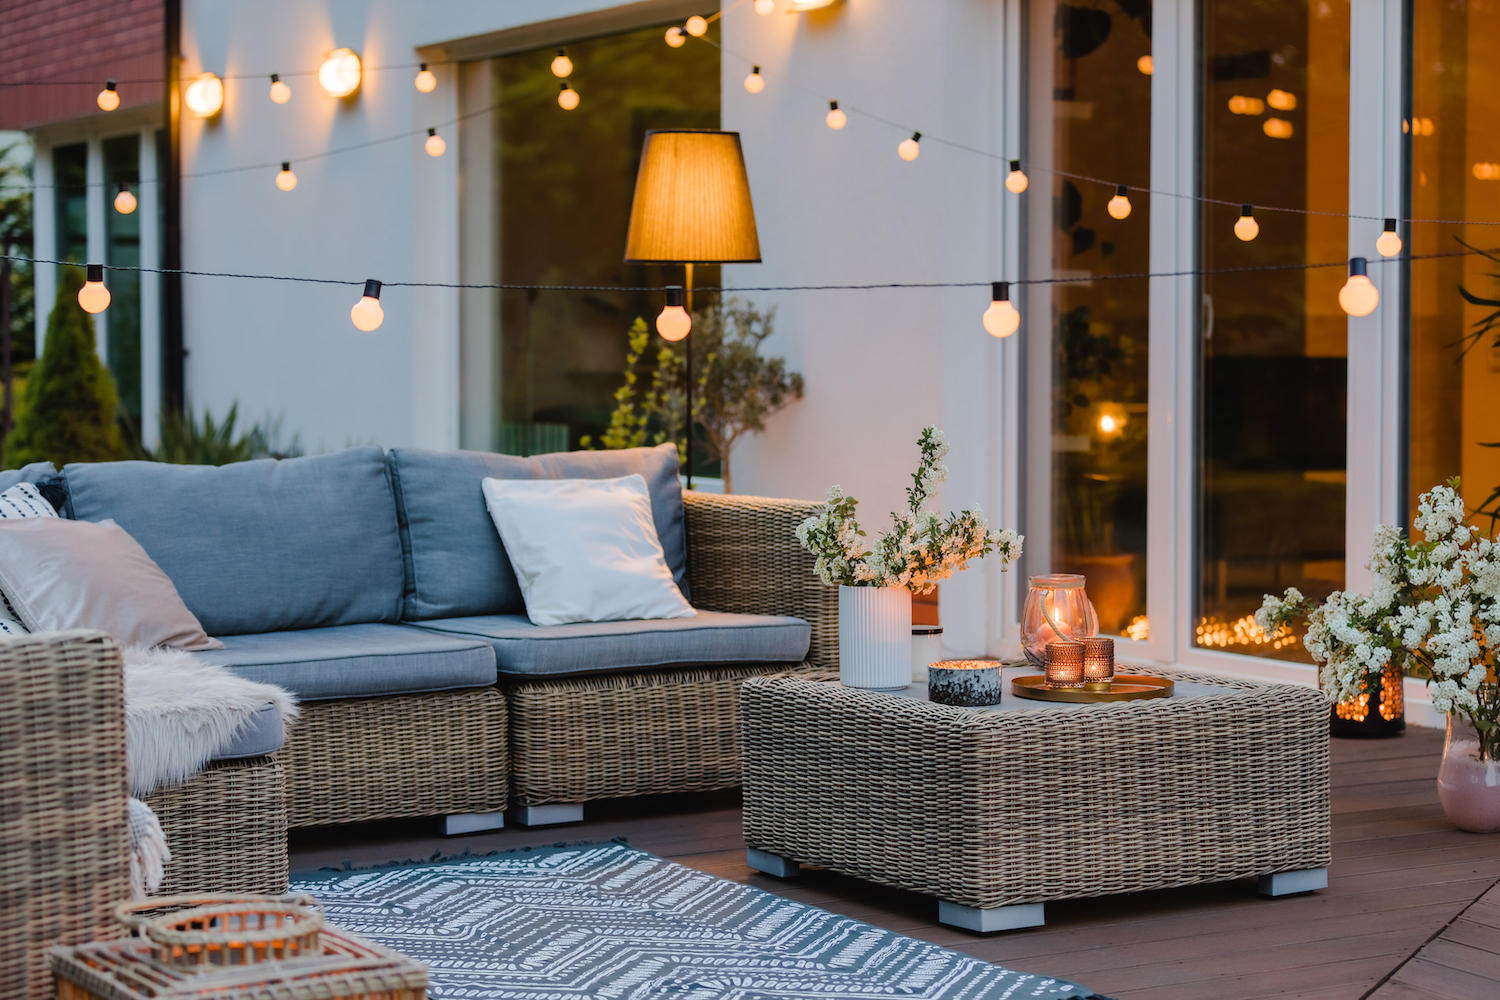 How to Hang String Lights on Covered Patio 